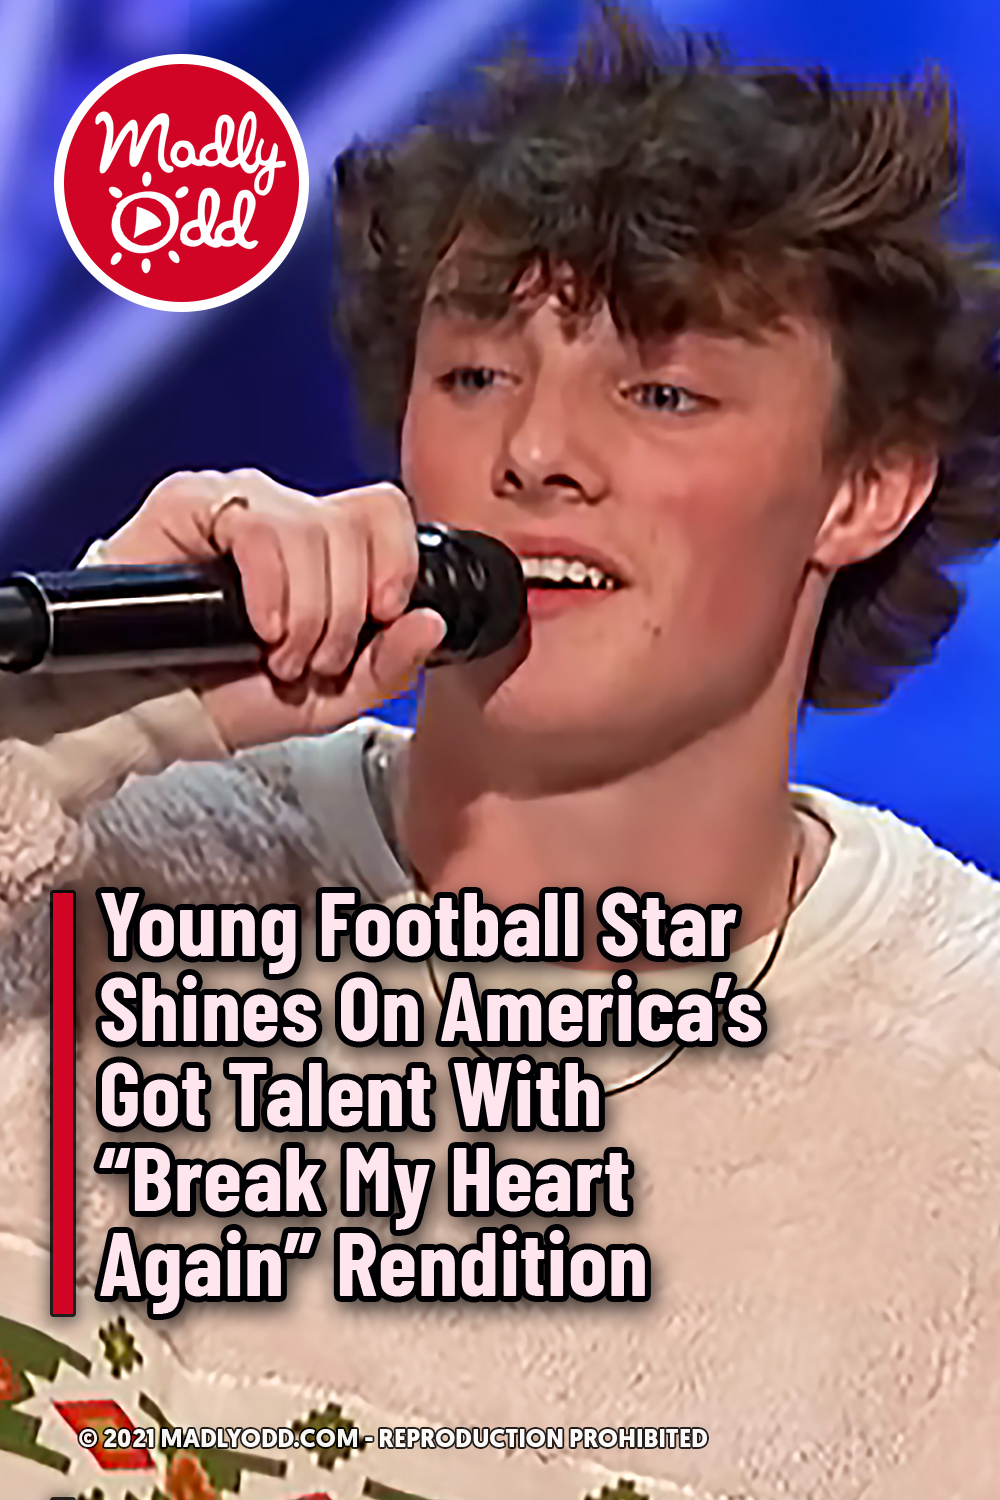 Young Football Star Shines On America’s Got Talent With “Break My Heart Again” Rendition